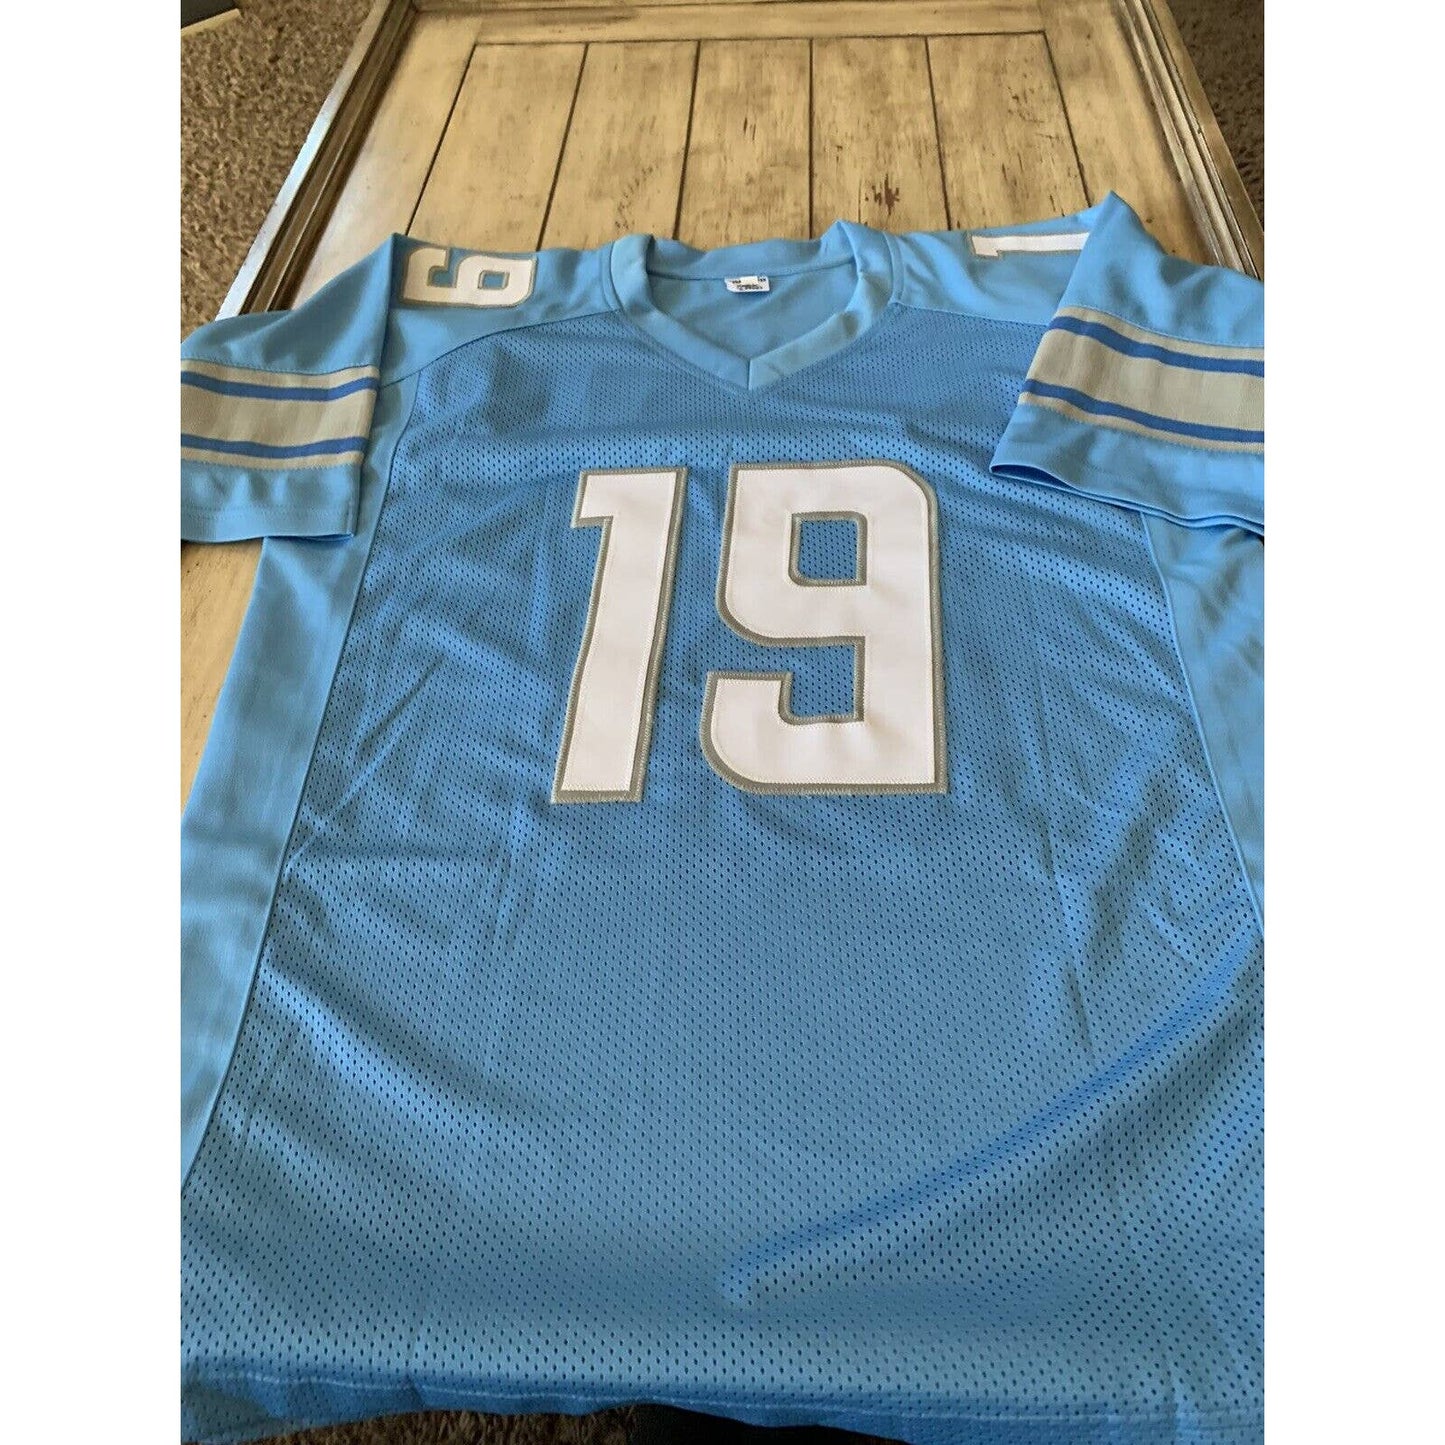 Kenny Golladay Autographed/Signed Jersey JSA COA Detroit Lions - TreasuresEvolved